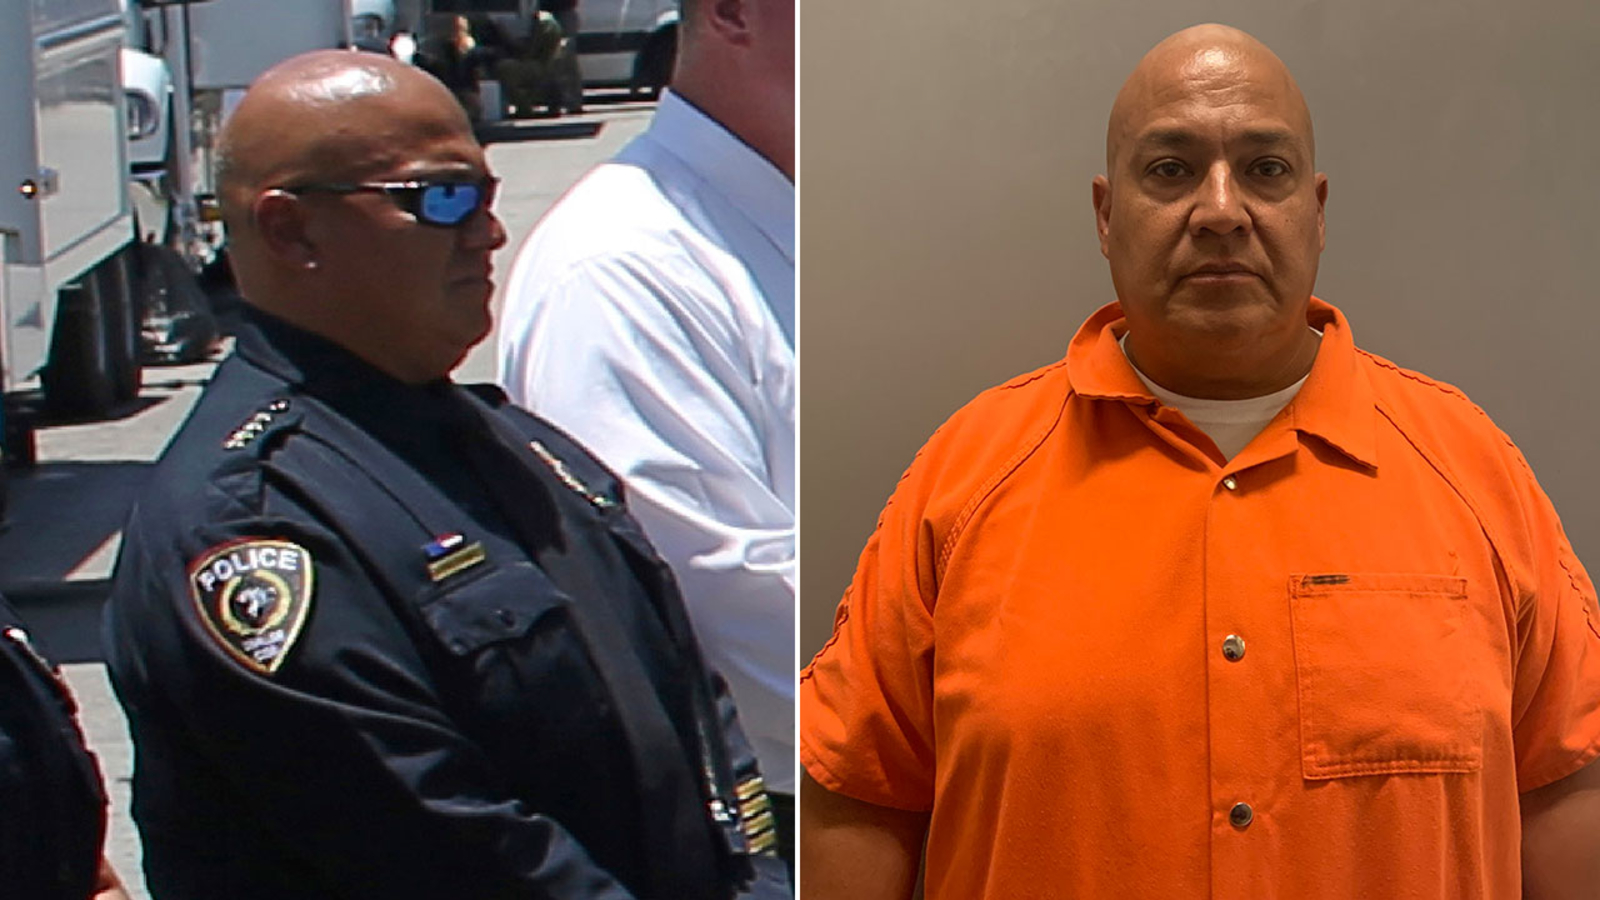 Indictment accuses former Uvalde schools police chief of delays while shooter was ‘hunting’ children [Video]